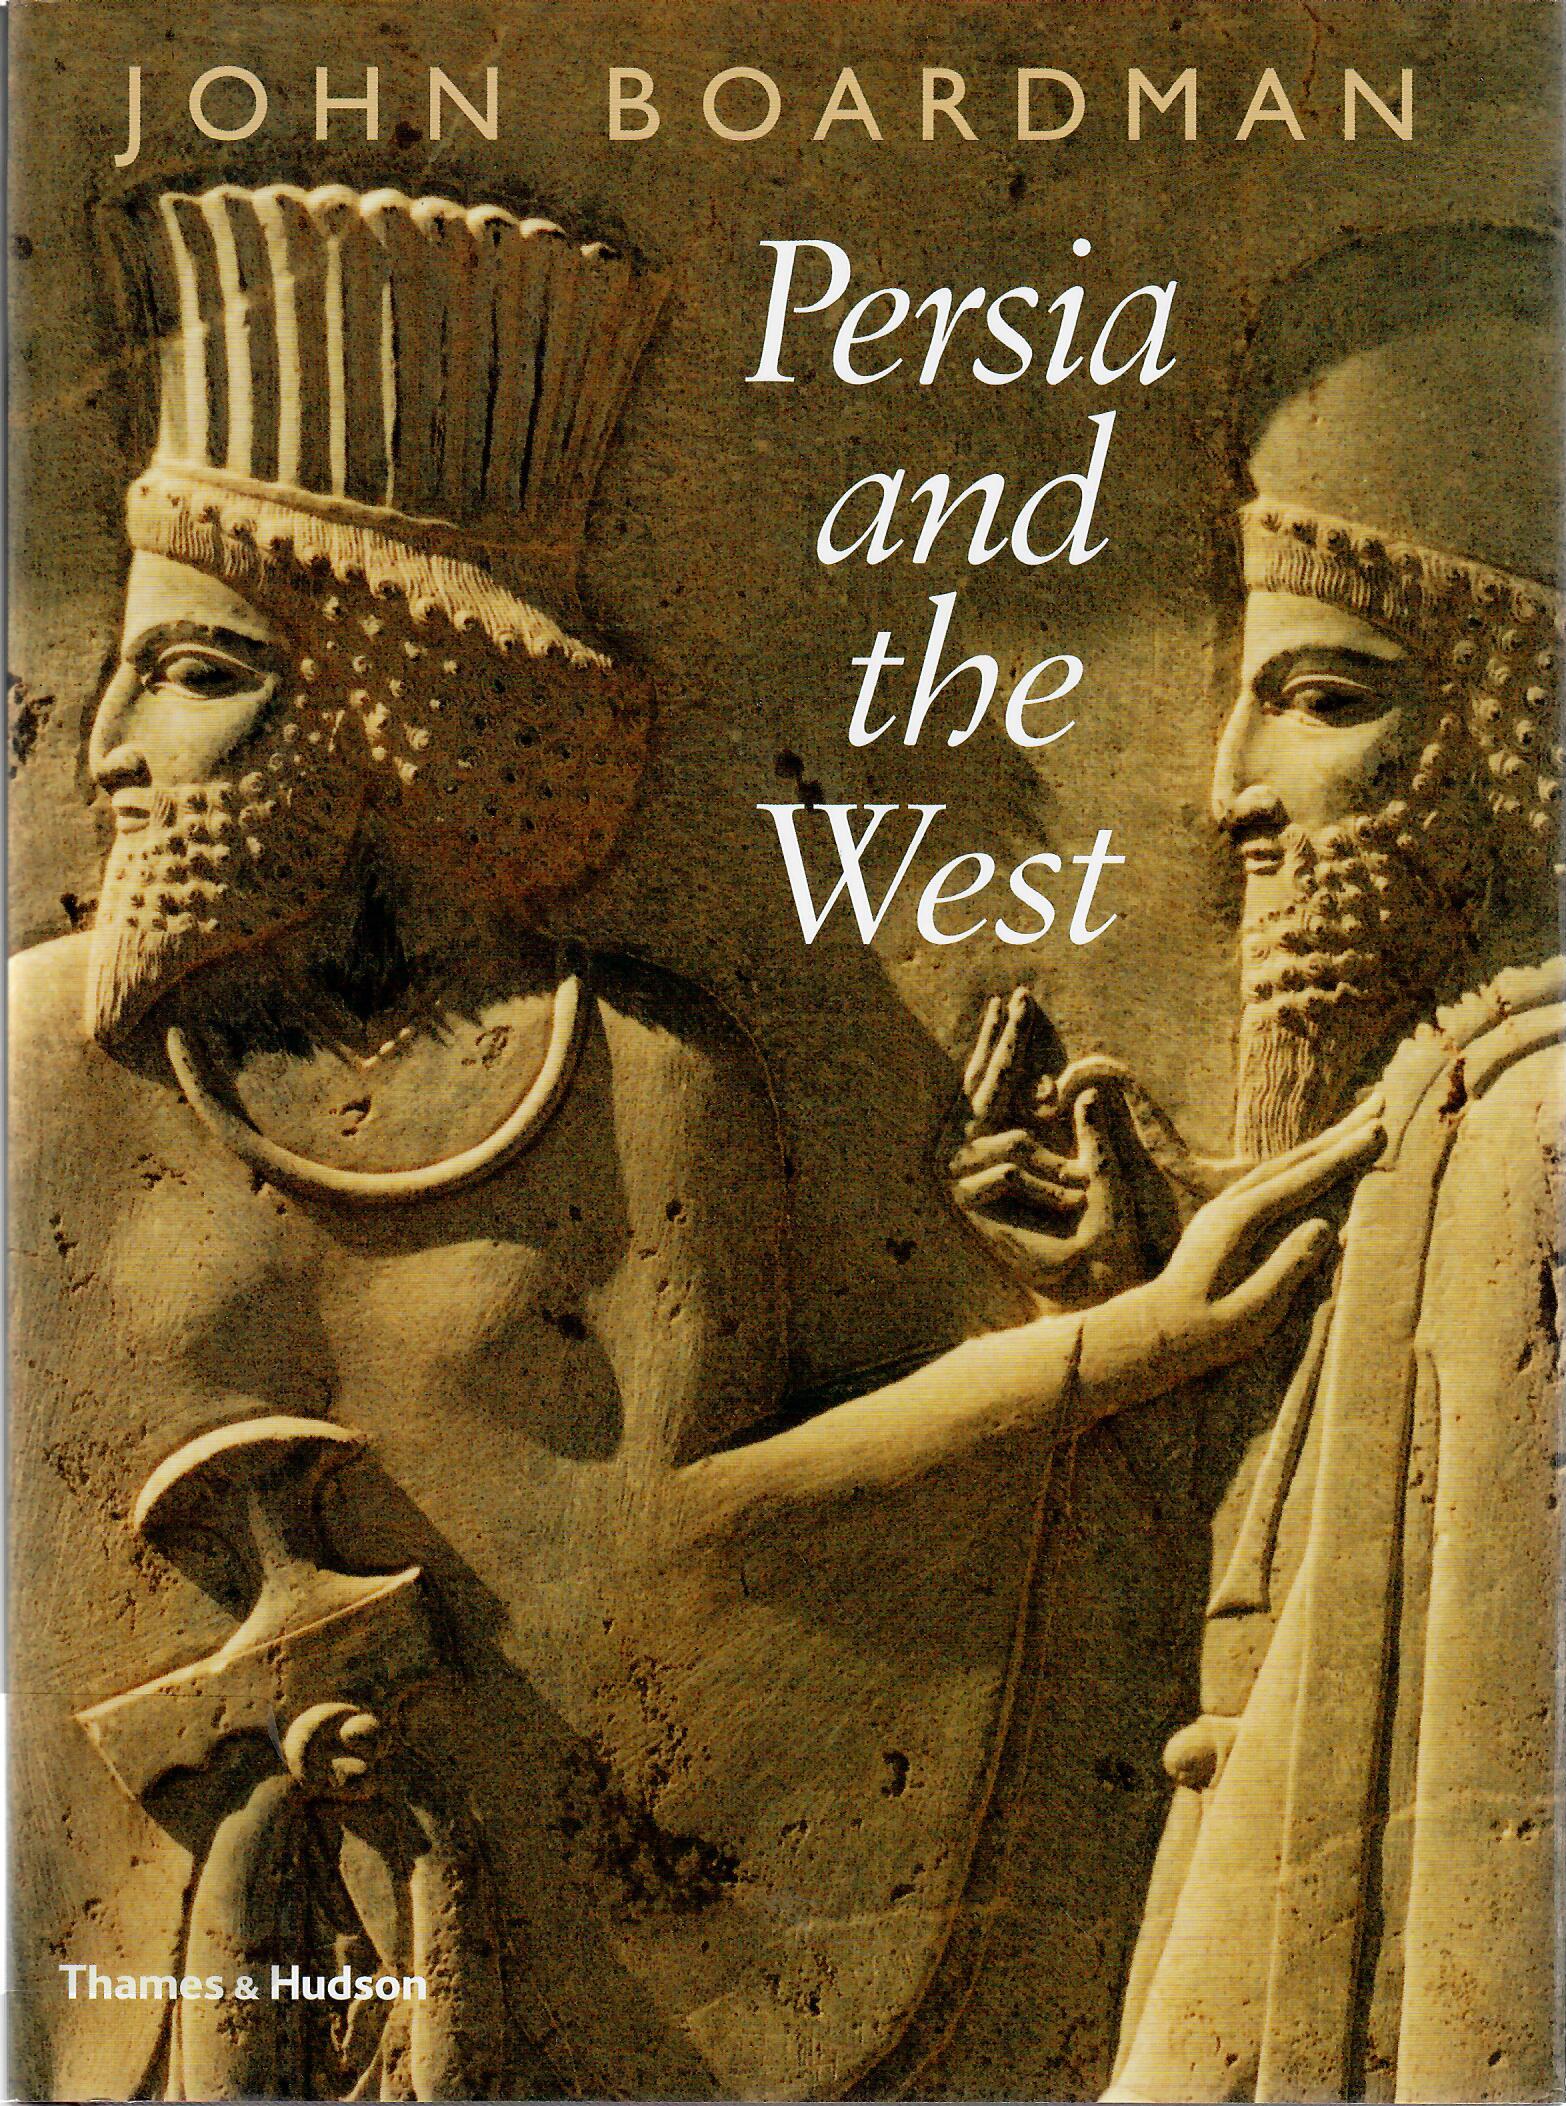 Persia and the west